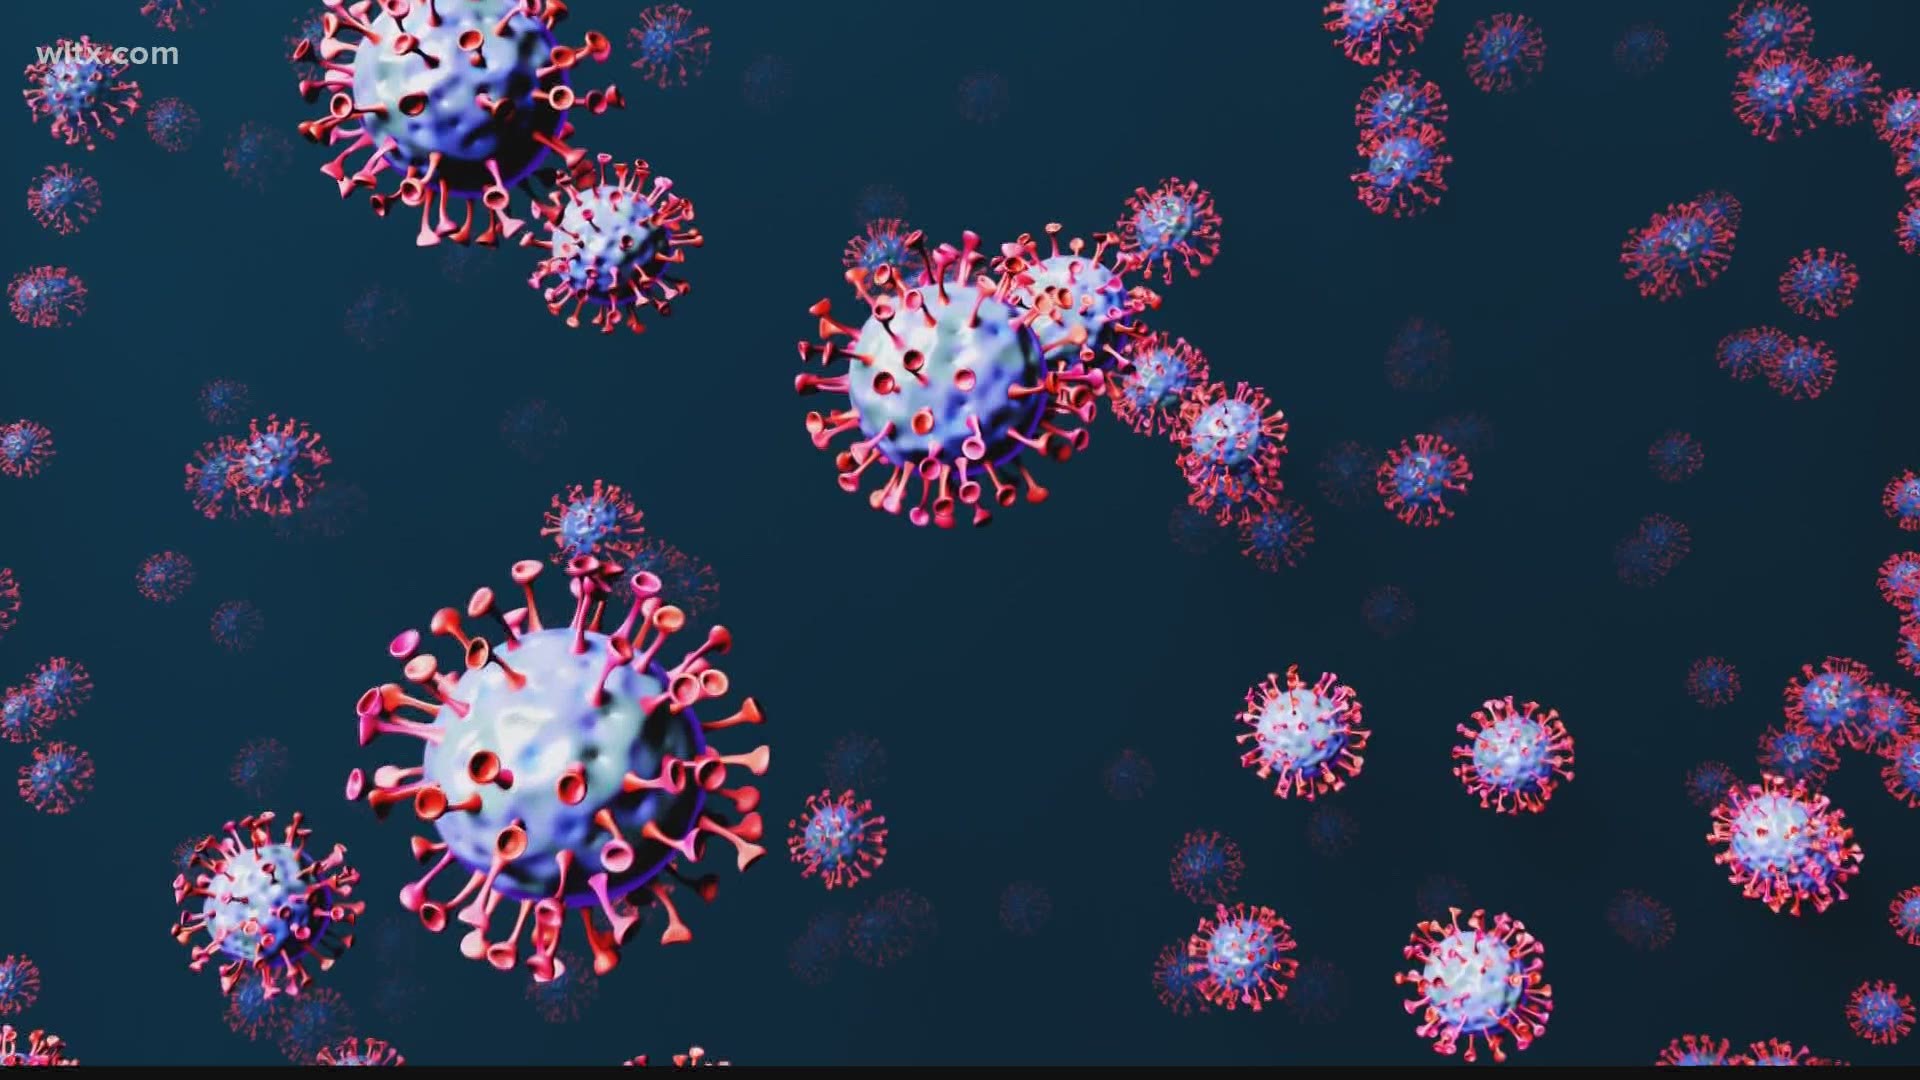 South Carolina doctors talk about the surge in cases of the coronavirus